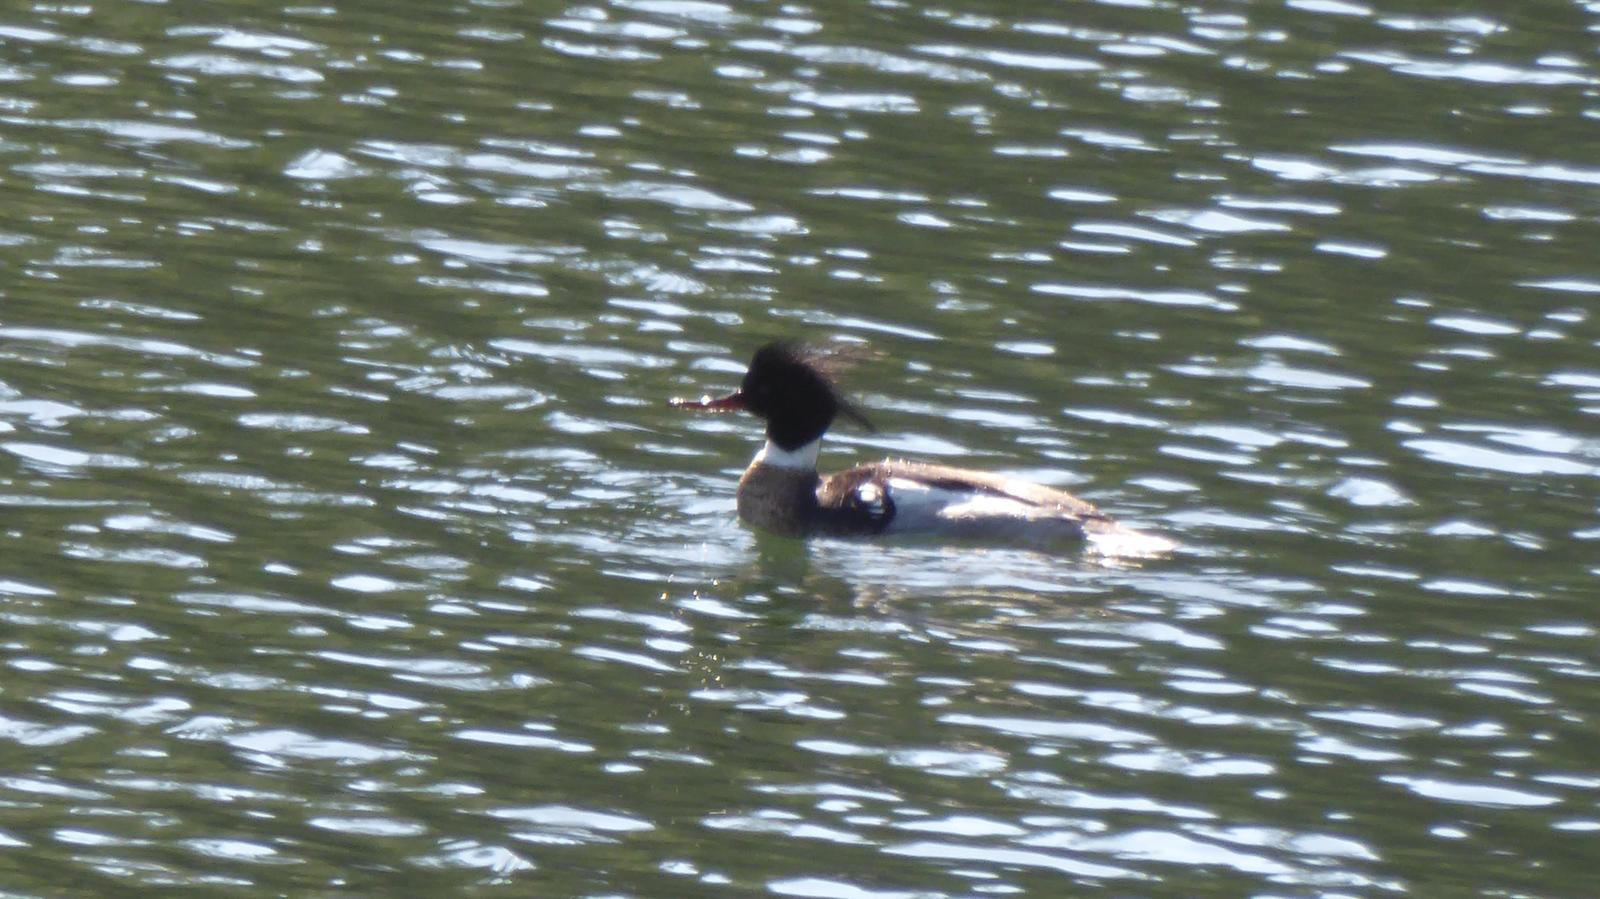 Red-breasted Merganser Photo by Daliel Leite